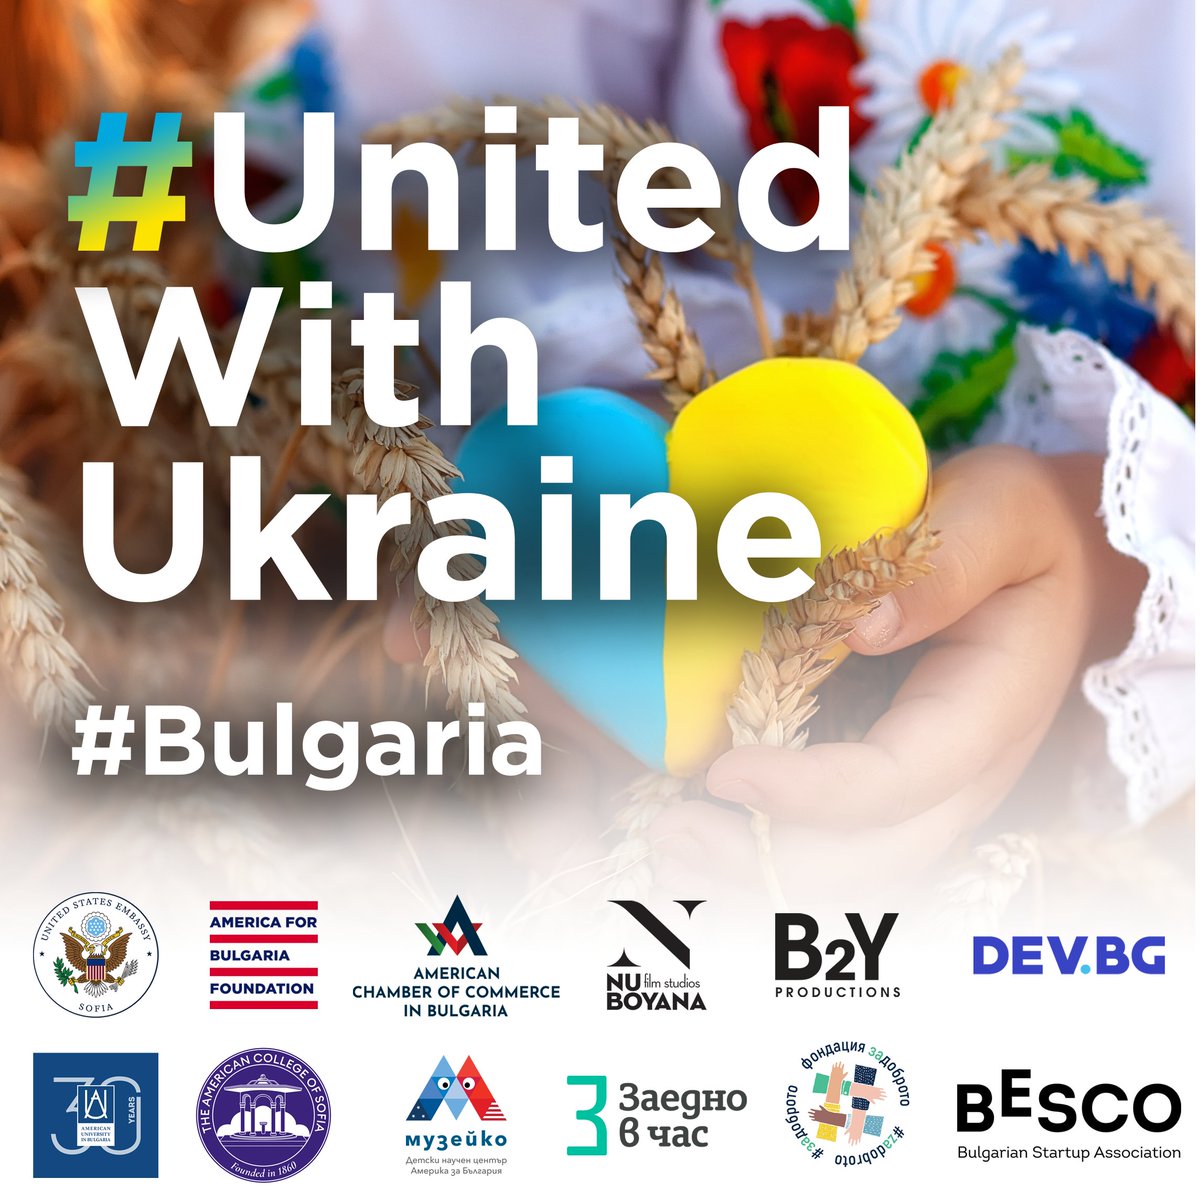 ACS expresses its solidarity with the freedom-loving people of Ukraine. The College will help displaced Ukrainian students in need of high school education.
@USEmbassySofia @US4bg @AmchamBulgaria @AUBGedu